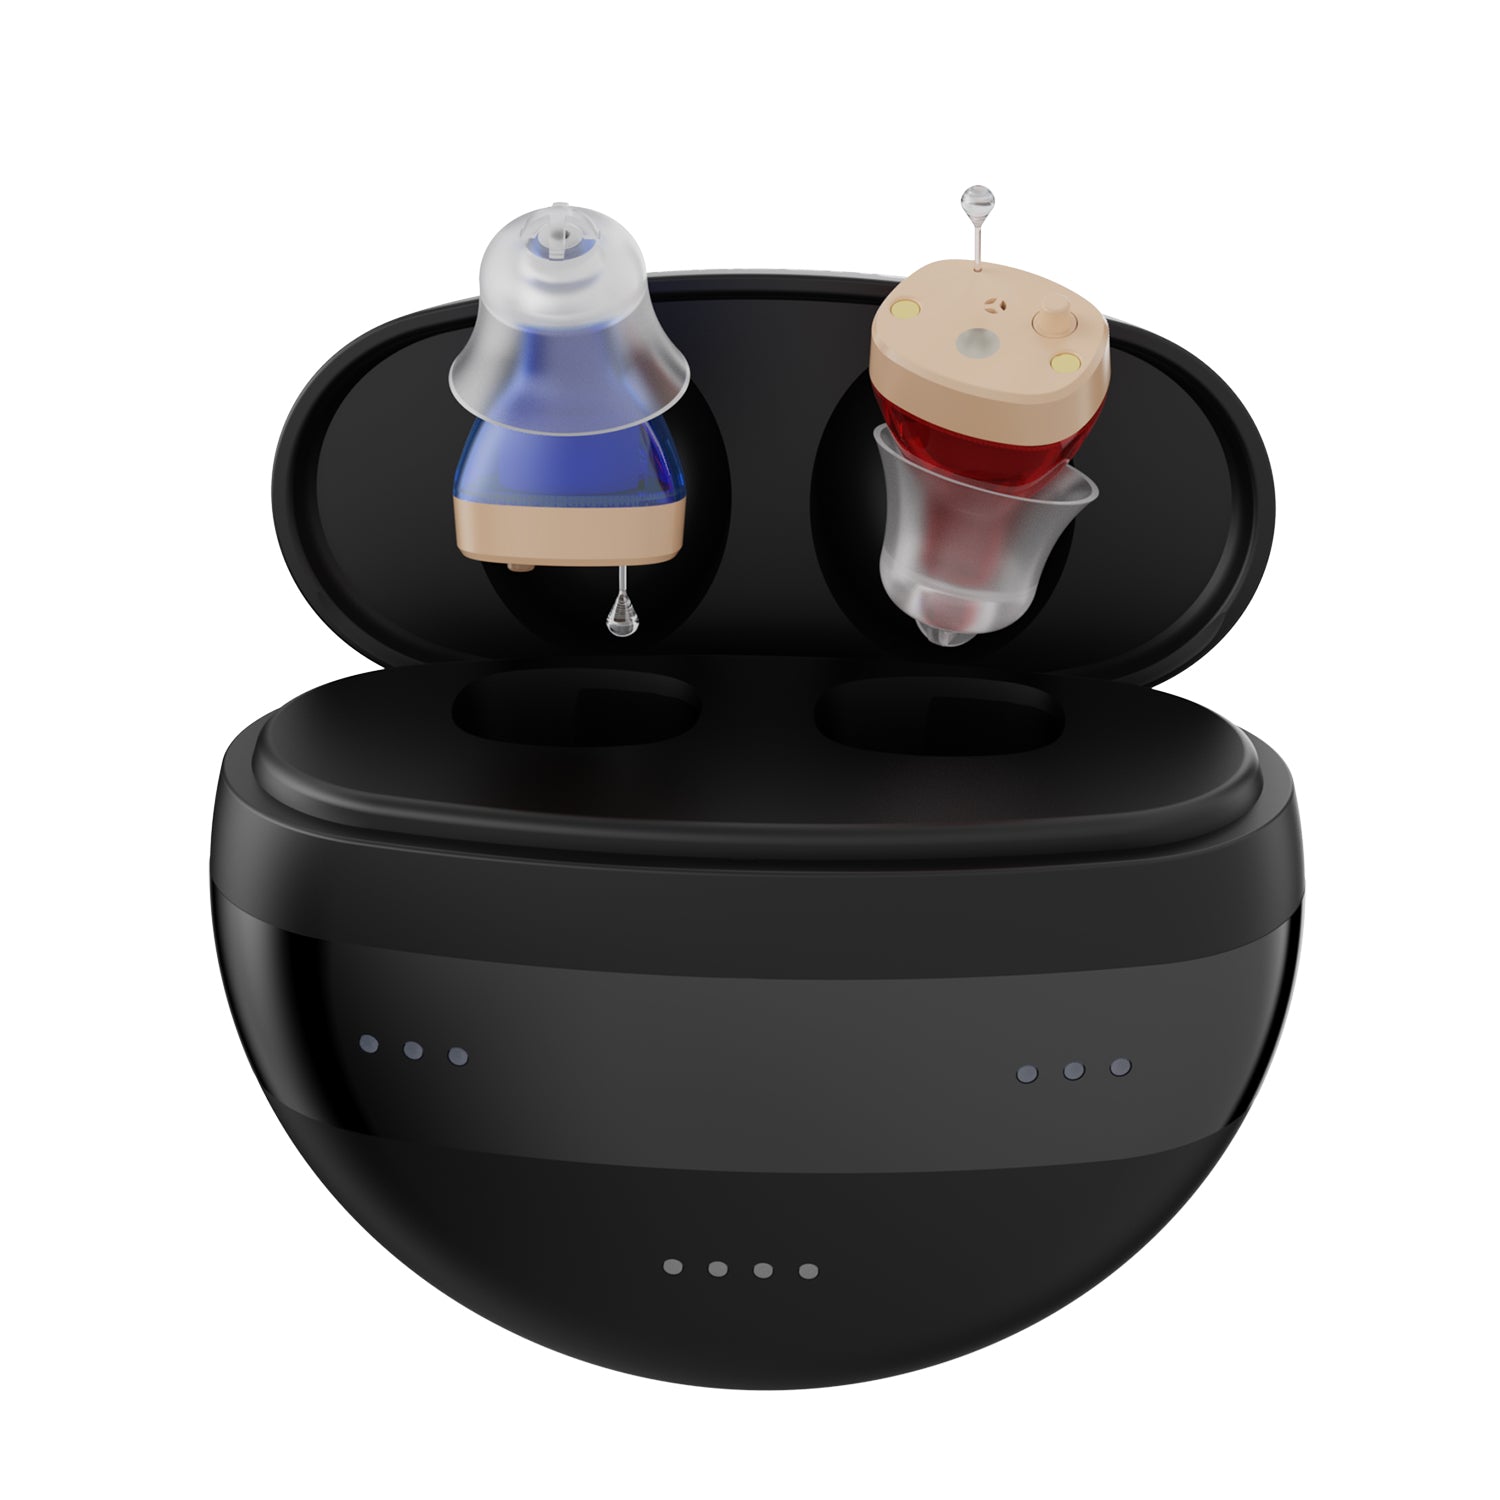 Soundbright Mini in-the-ear hearing aids open charging case with both hearing aids displayed